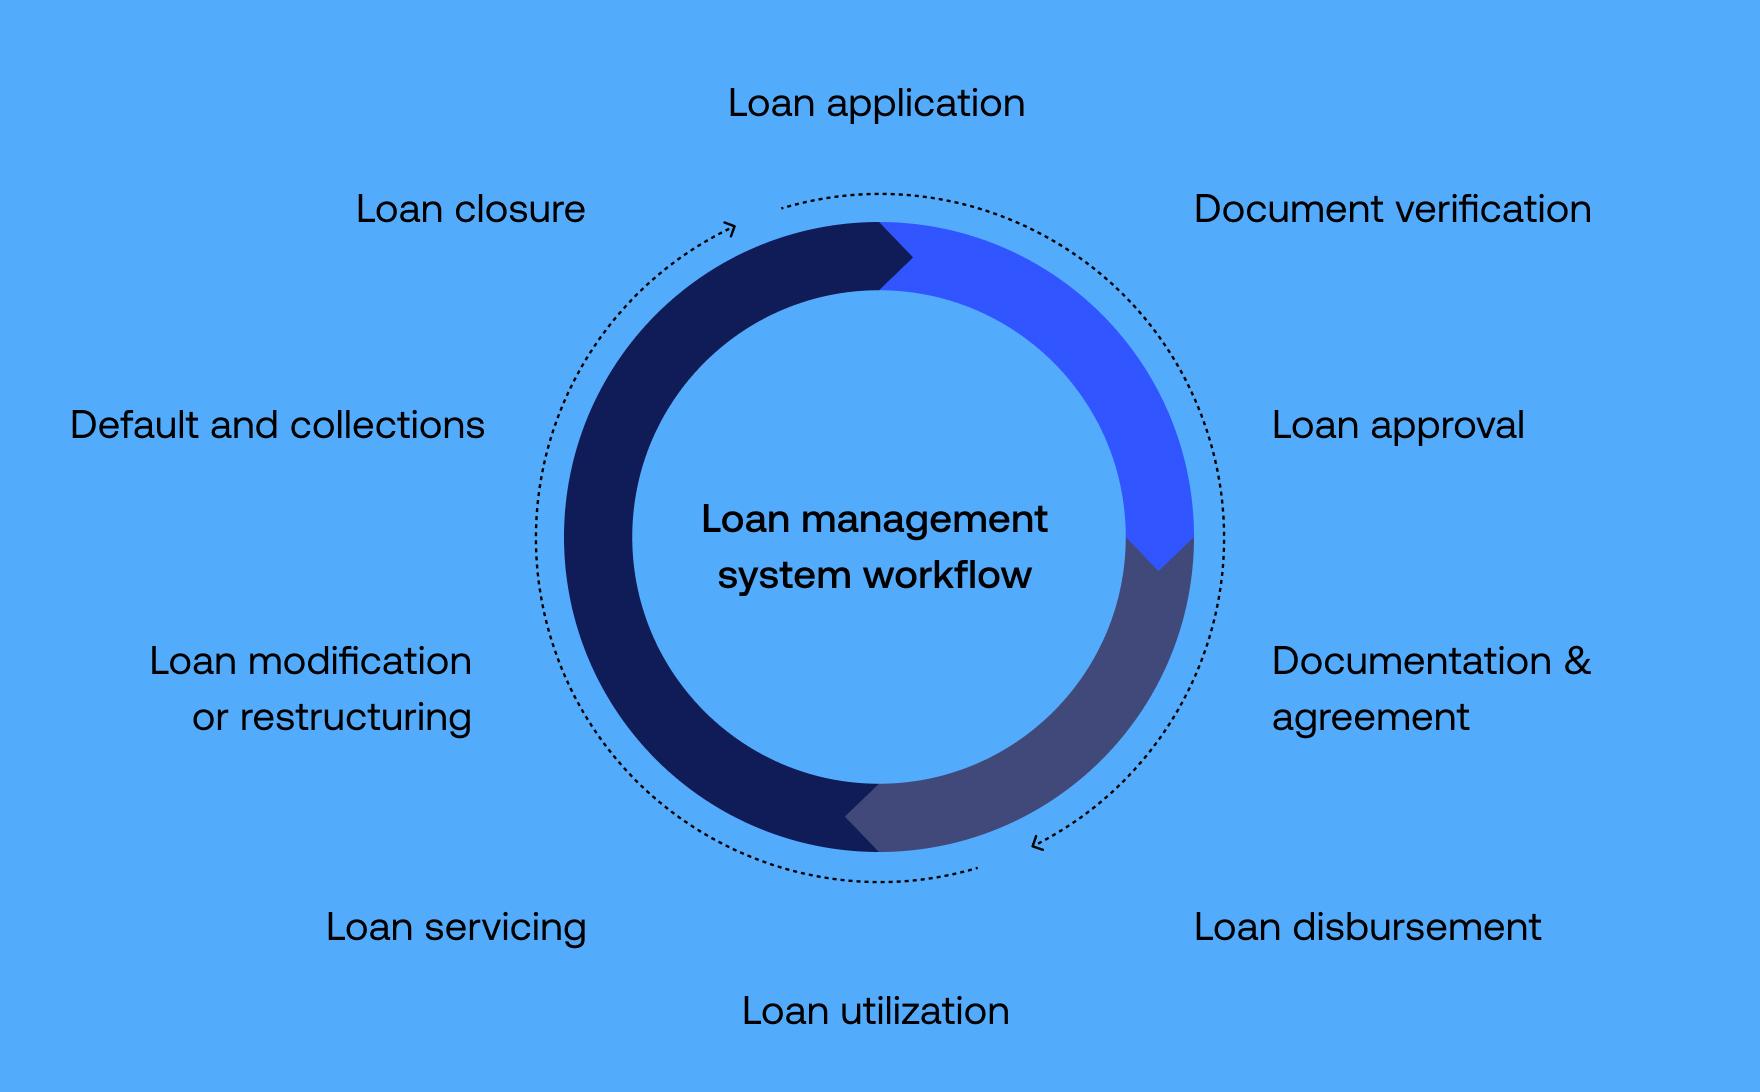 Loan management system workflow